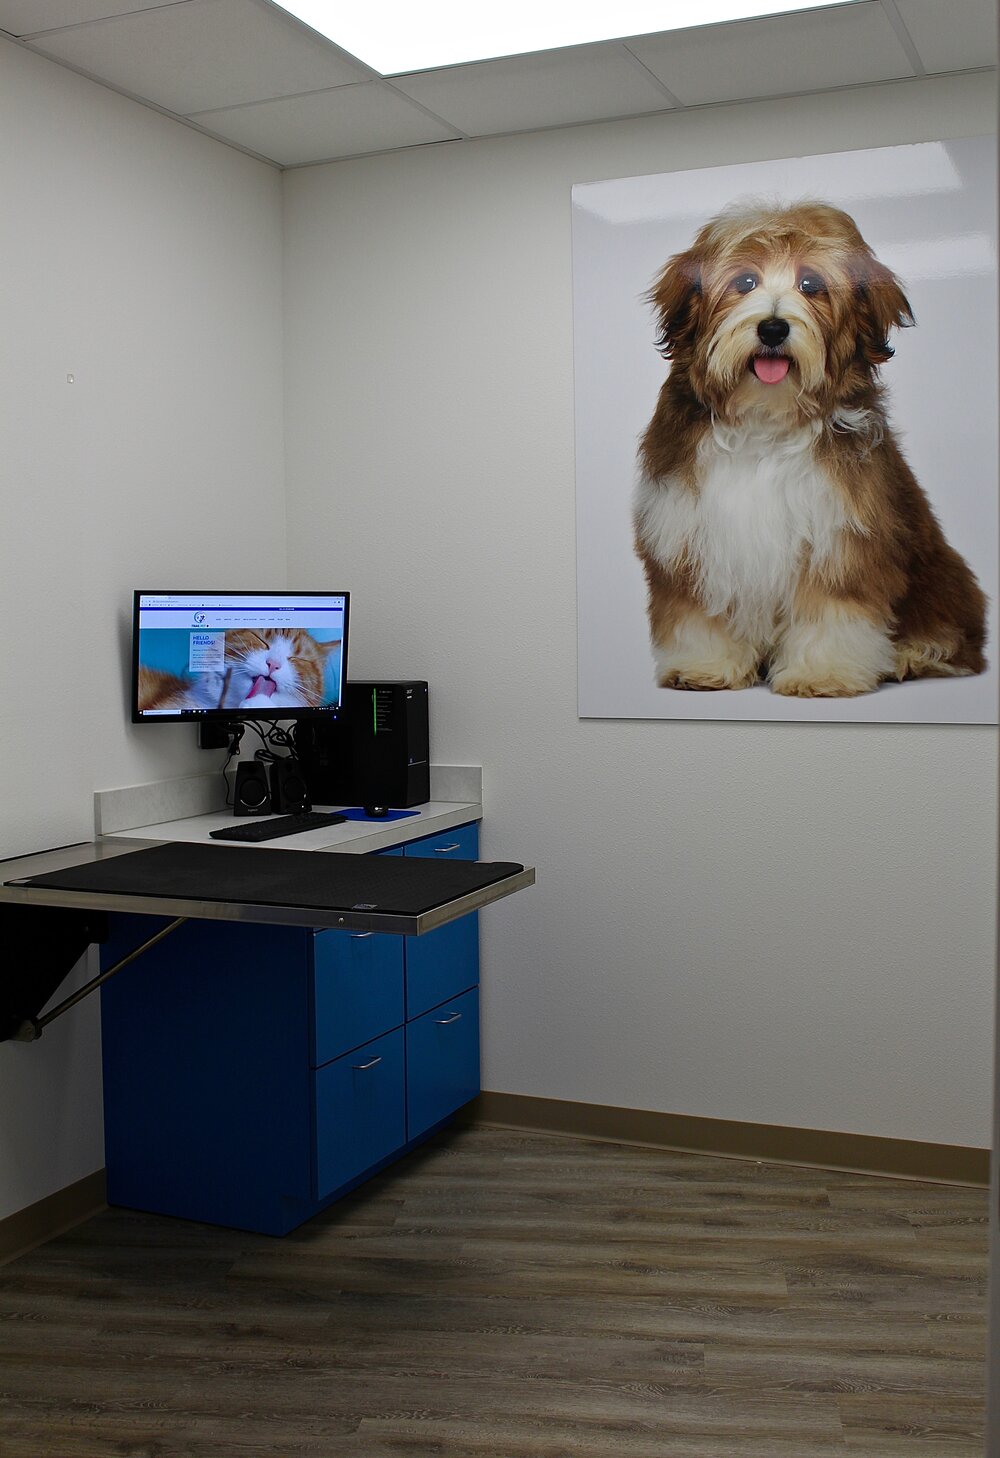 Trail Pet Hospital facility with an examination table and desktop computer for dogs